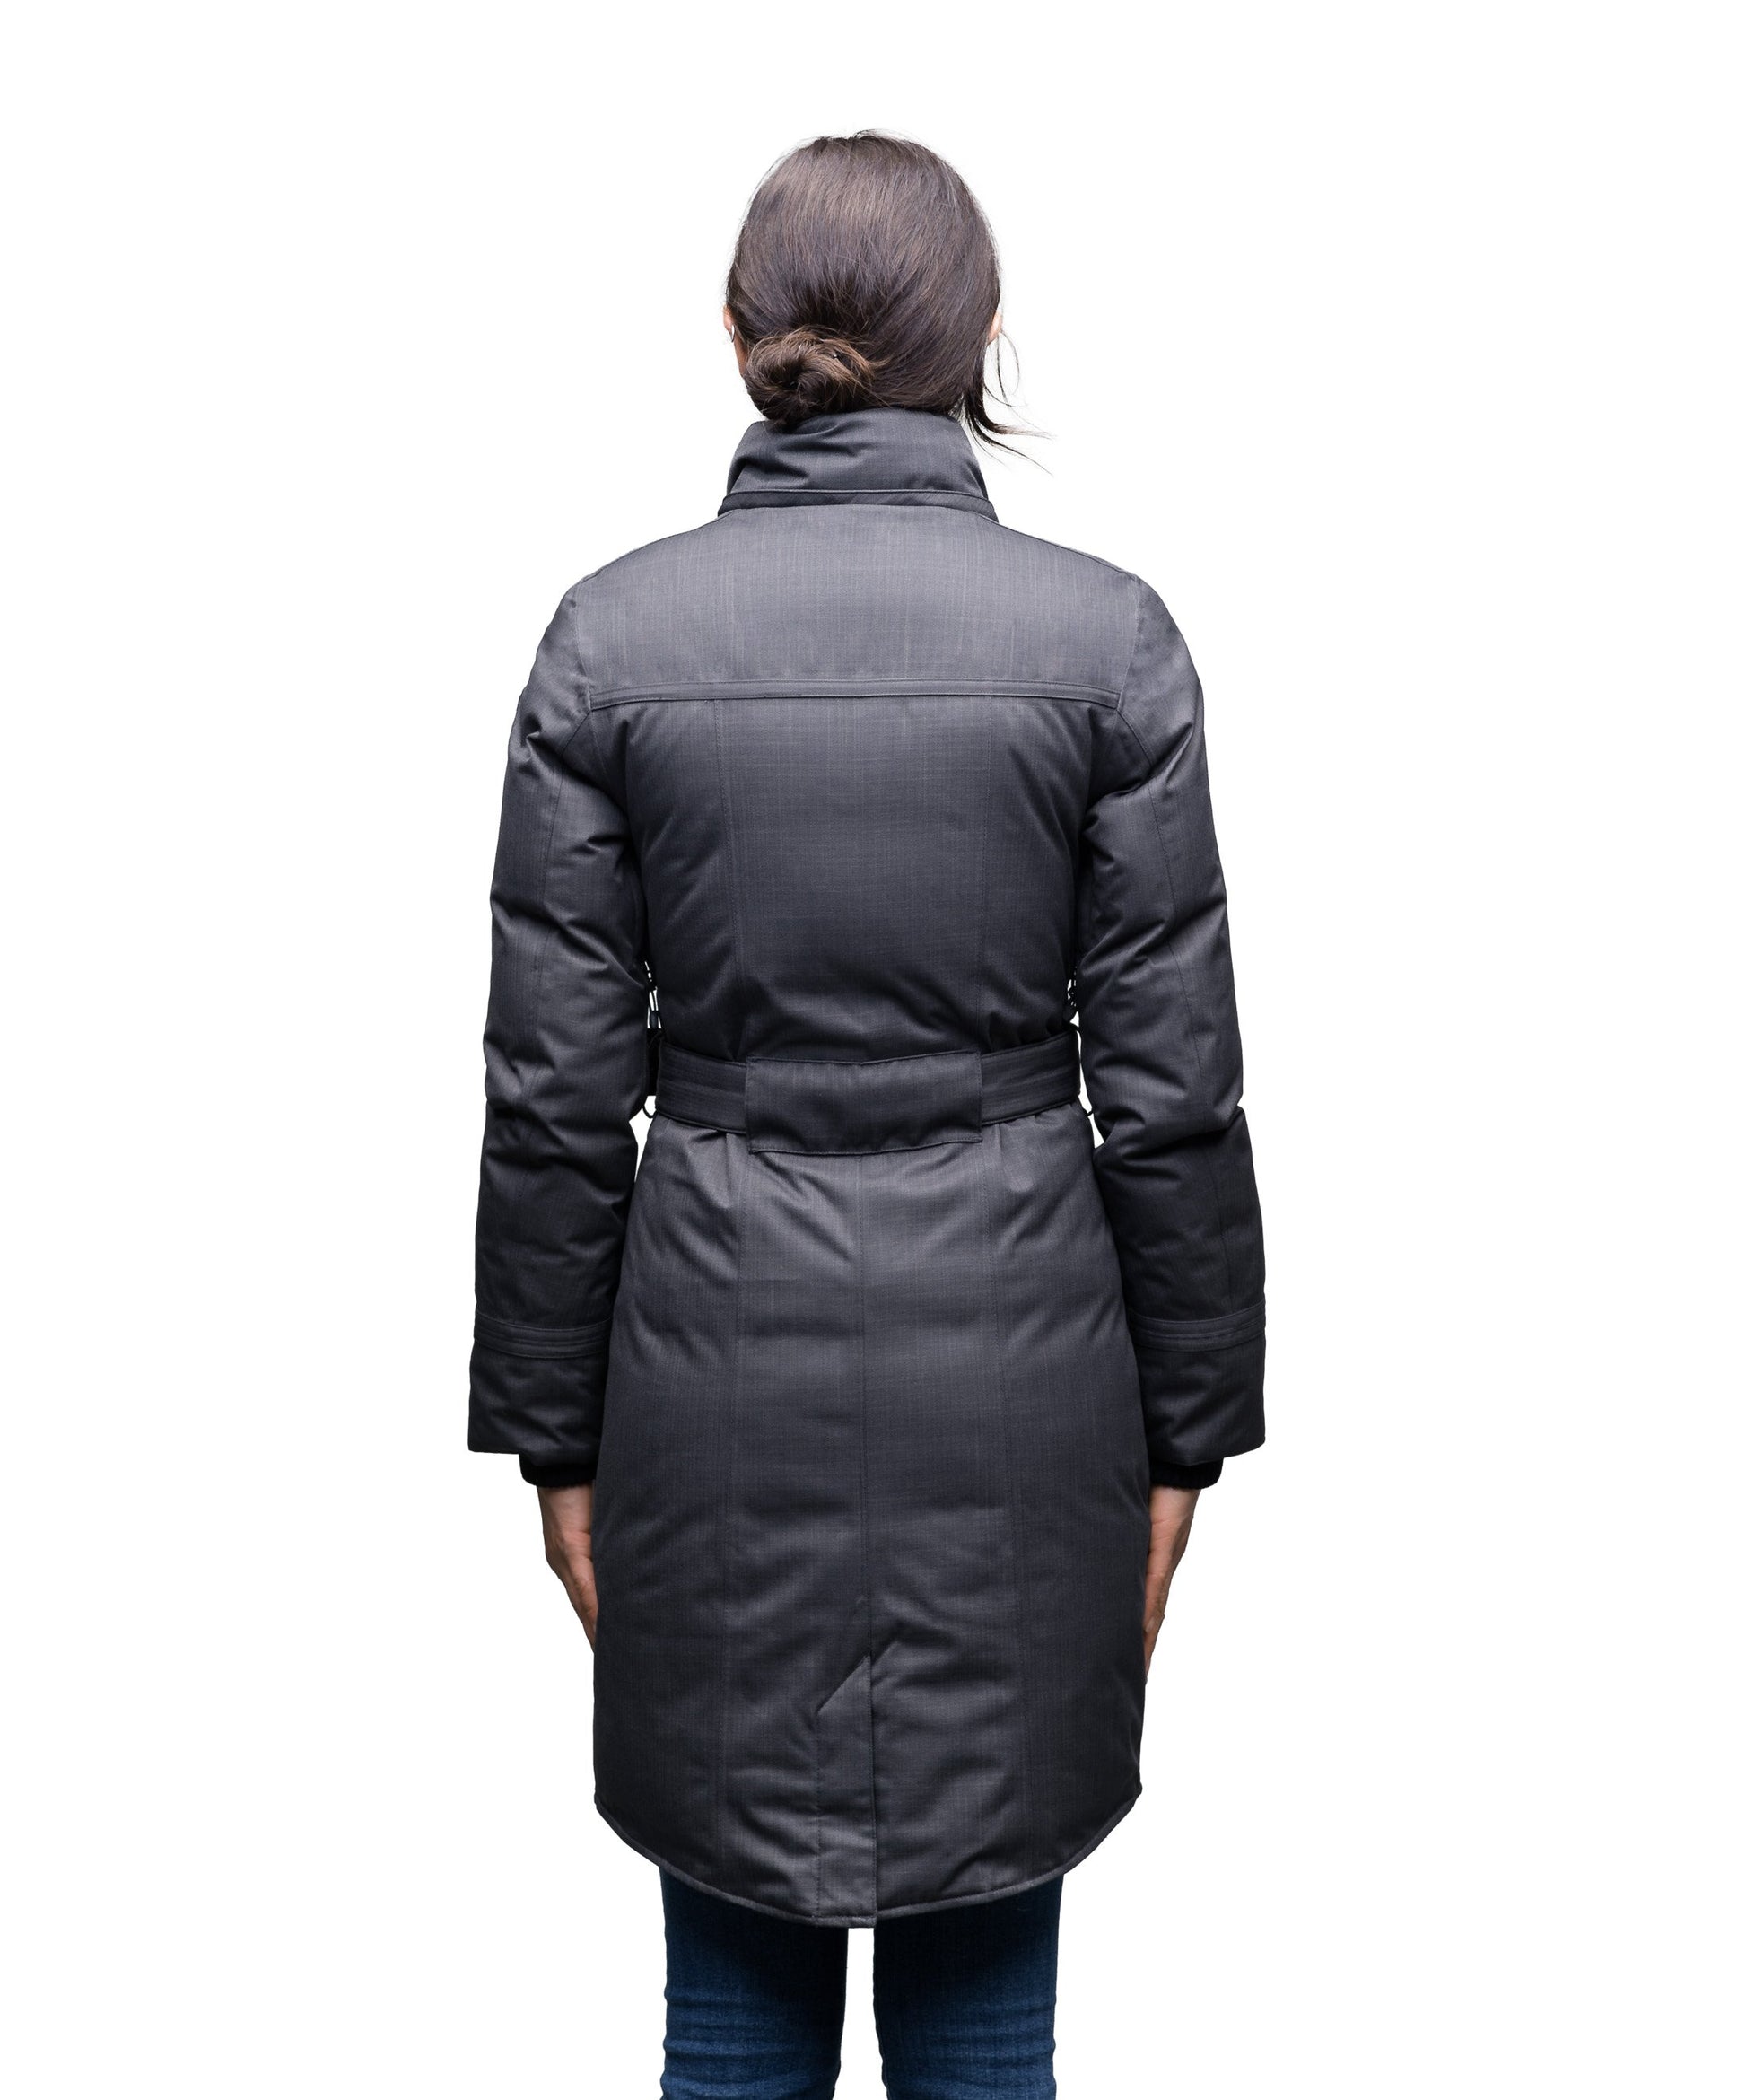 Women's down filled calf length parka with belted waist, and removable Rex Rabbit fur collar in CH Steel Grey